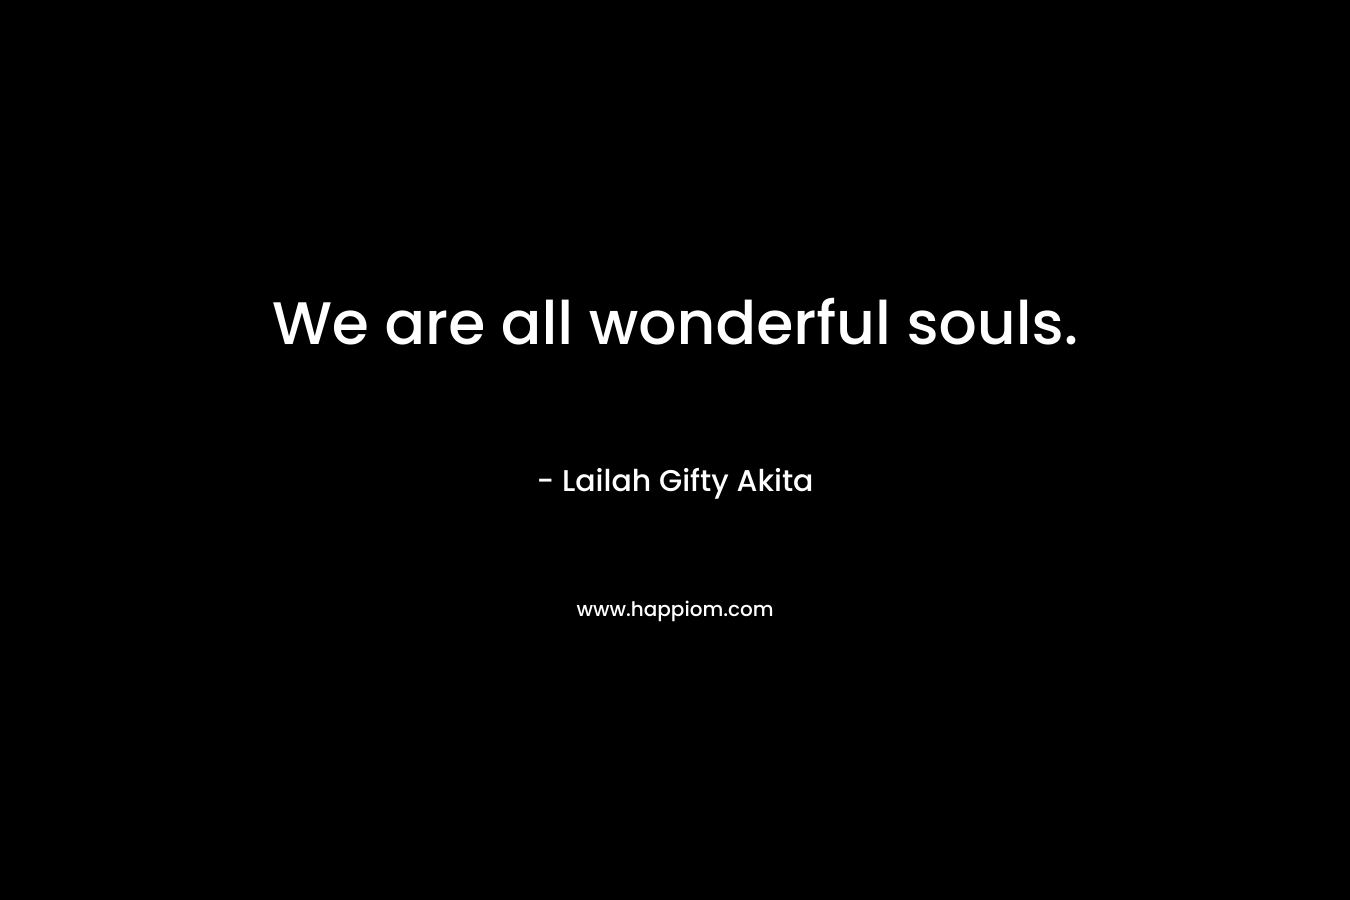 We are all wonderful souls.